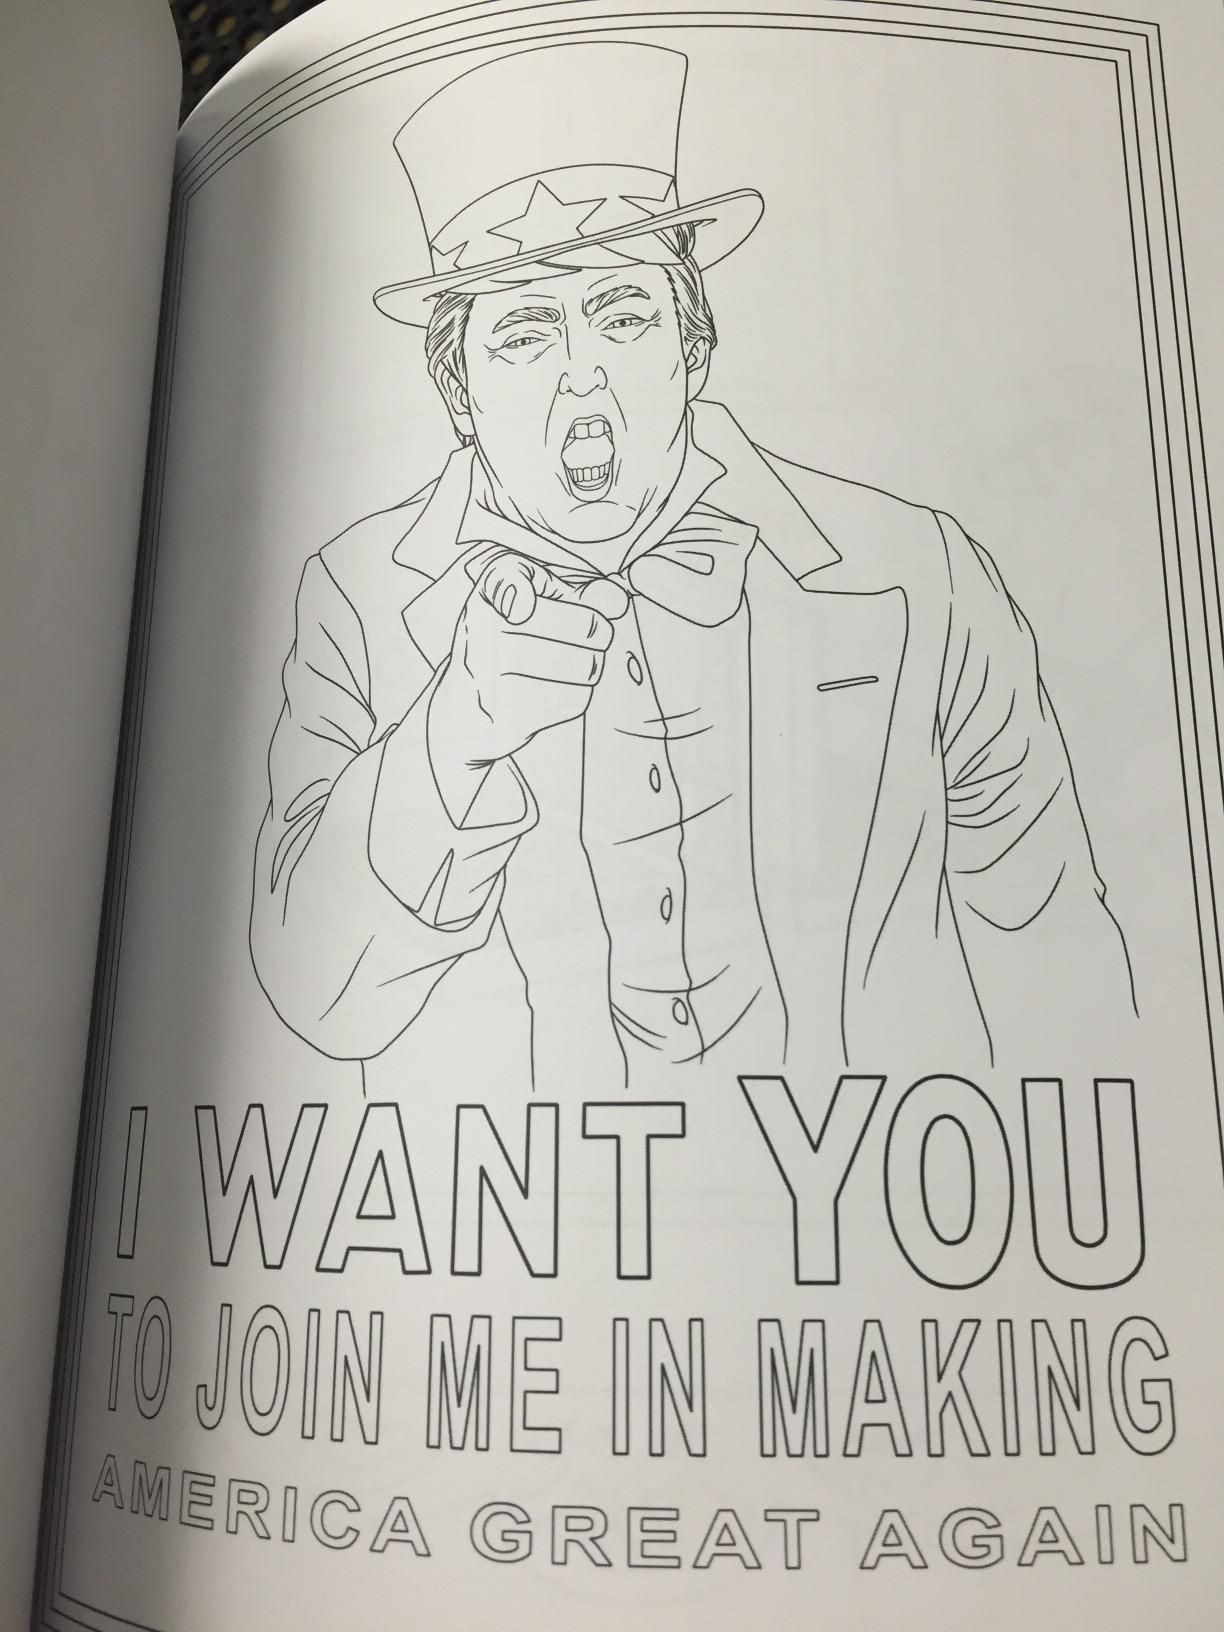 Trump Adult Coloring Book
 Amazon Prime Now The Trump Coloring Book